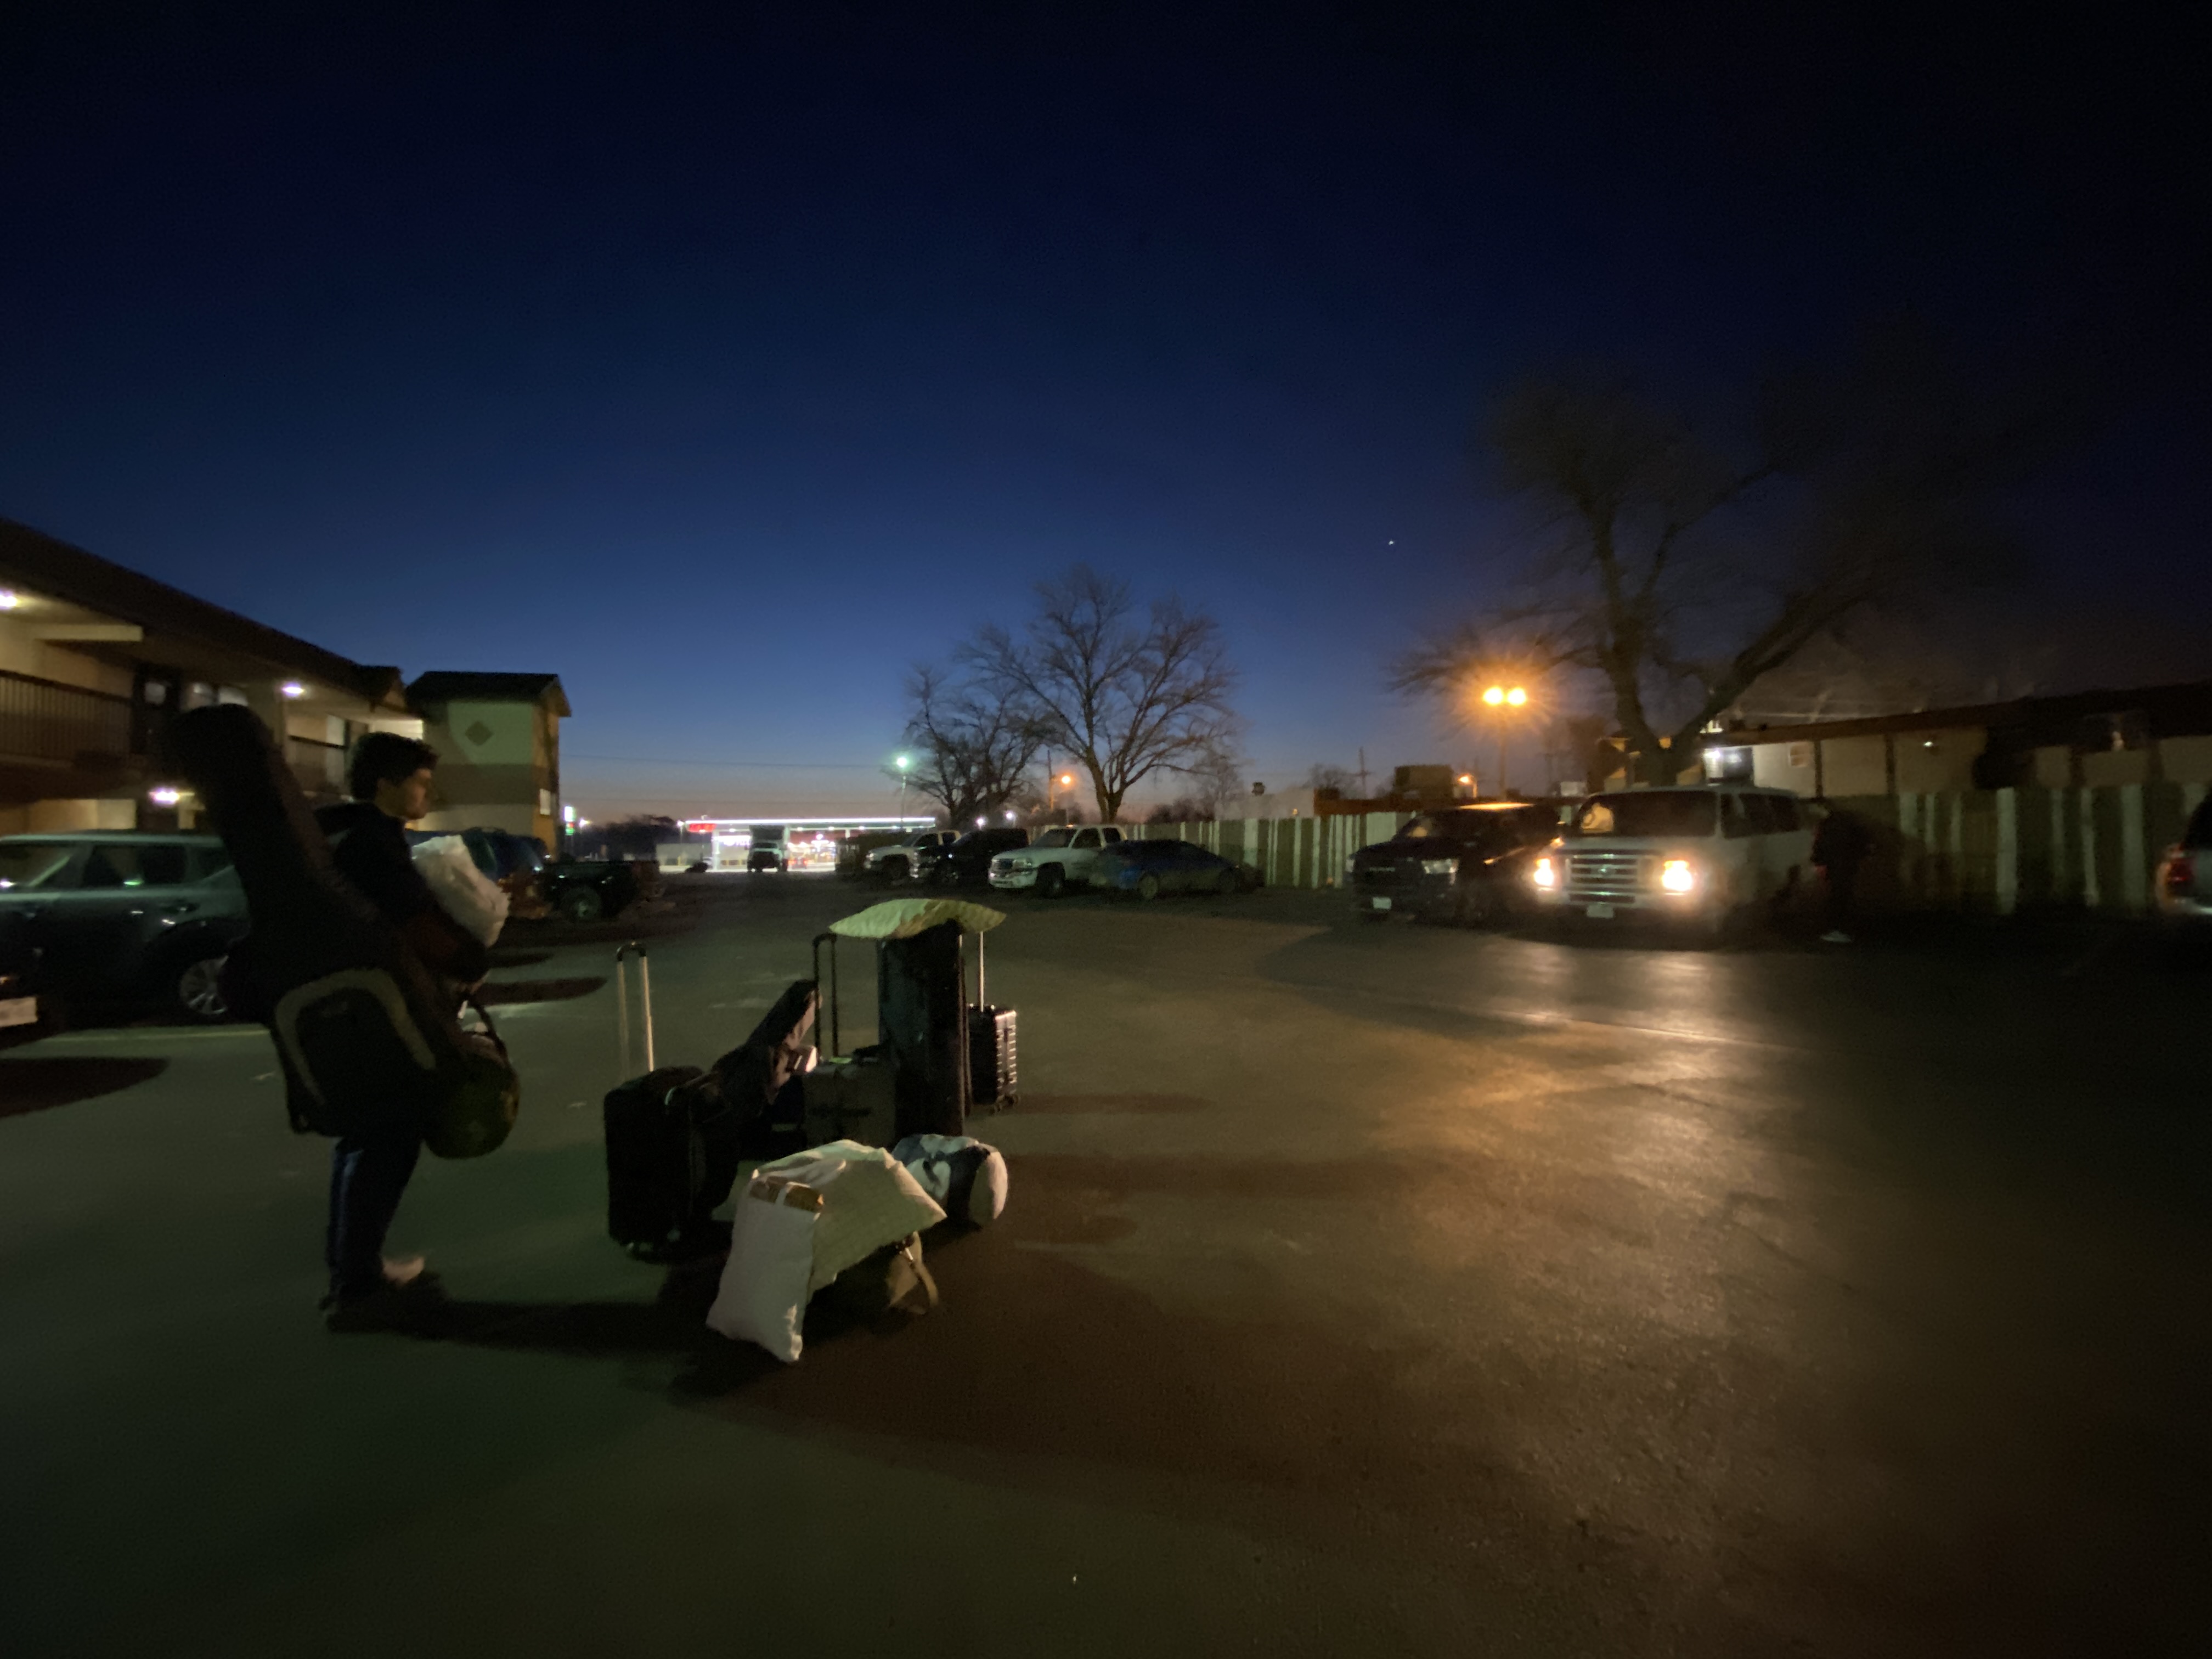 Lane stands with the band’s bags in the parking lot of a motel in Tulsa, Oklahoma, at dawn, illuminated by our van’s headlights.